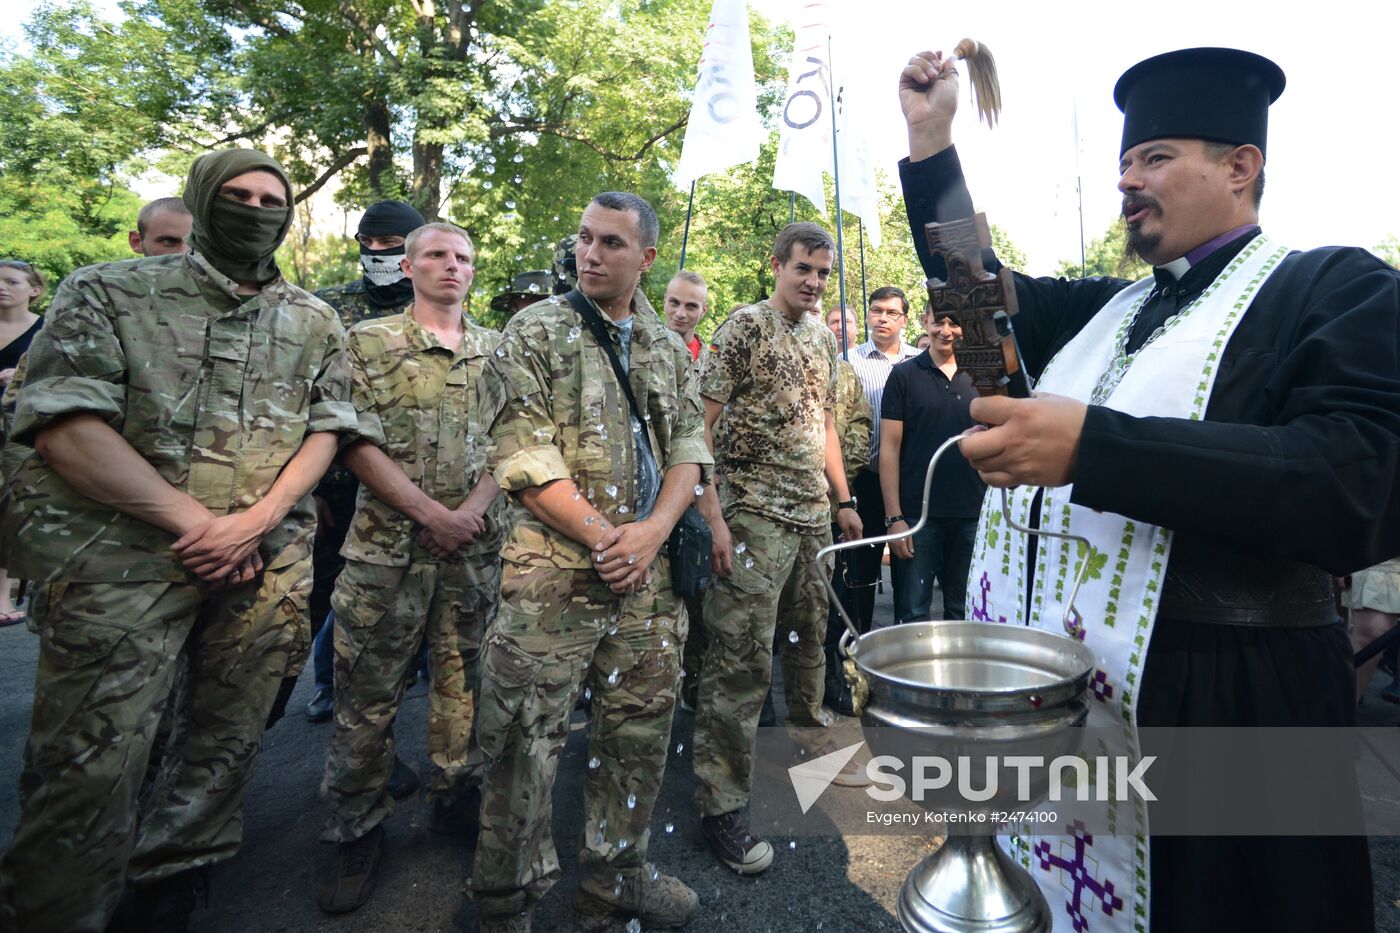 Ceremony to see off soldiers of National Guard battalion "Shakhtyorsk" leaving for military operation zone